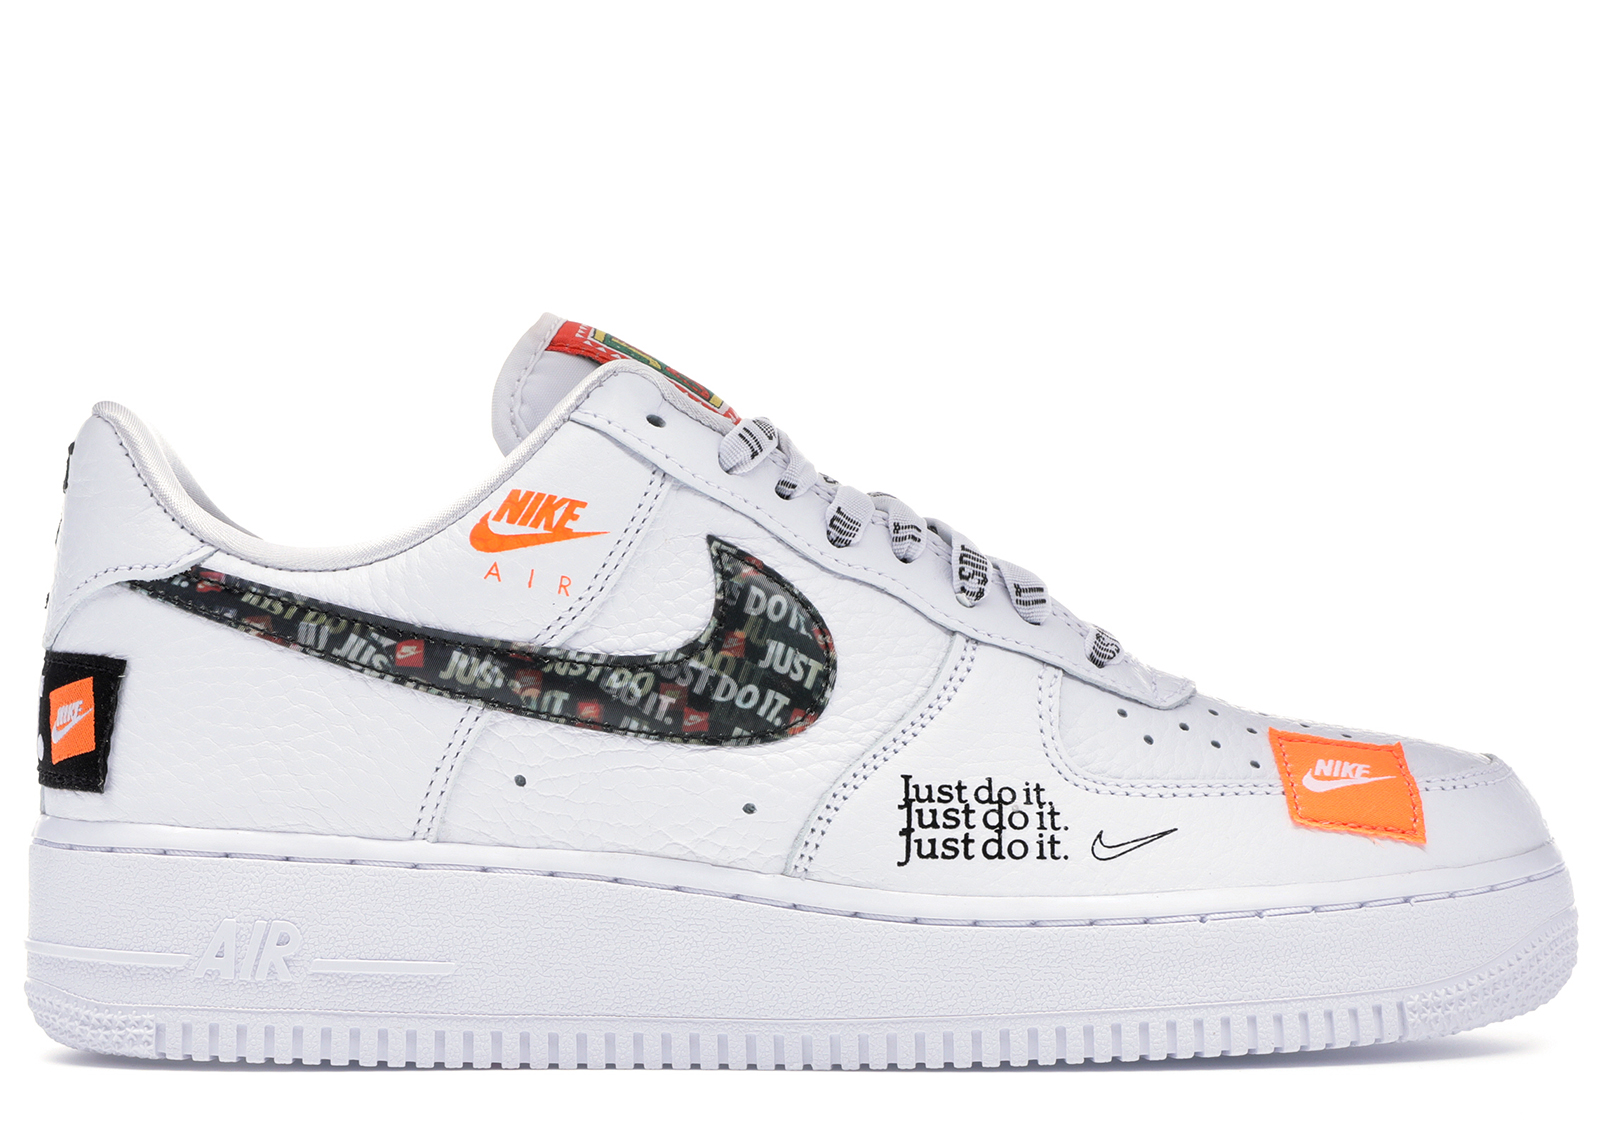 Nike Air Force 1 Sketch at PaintingValley.com | Explore collection of ...